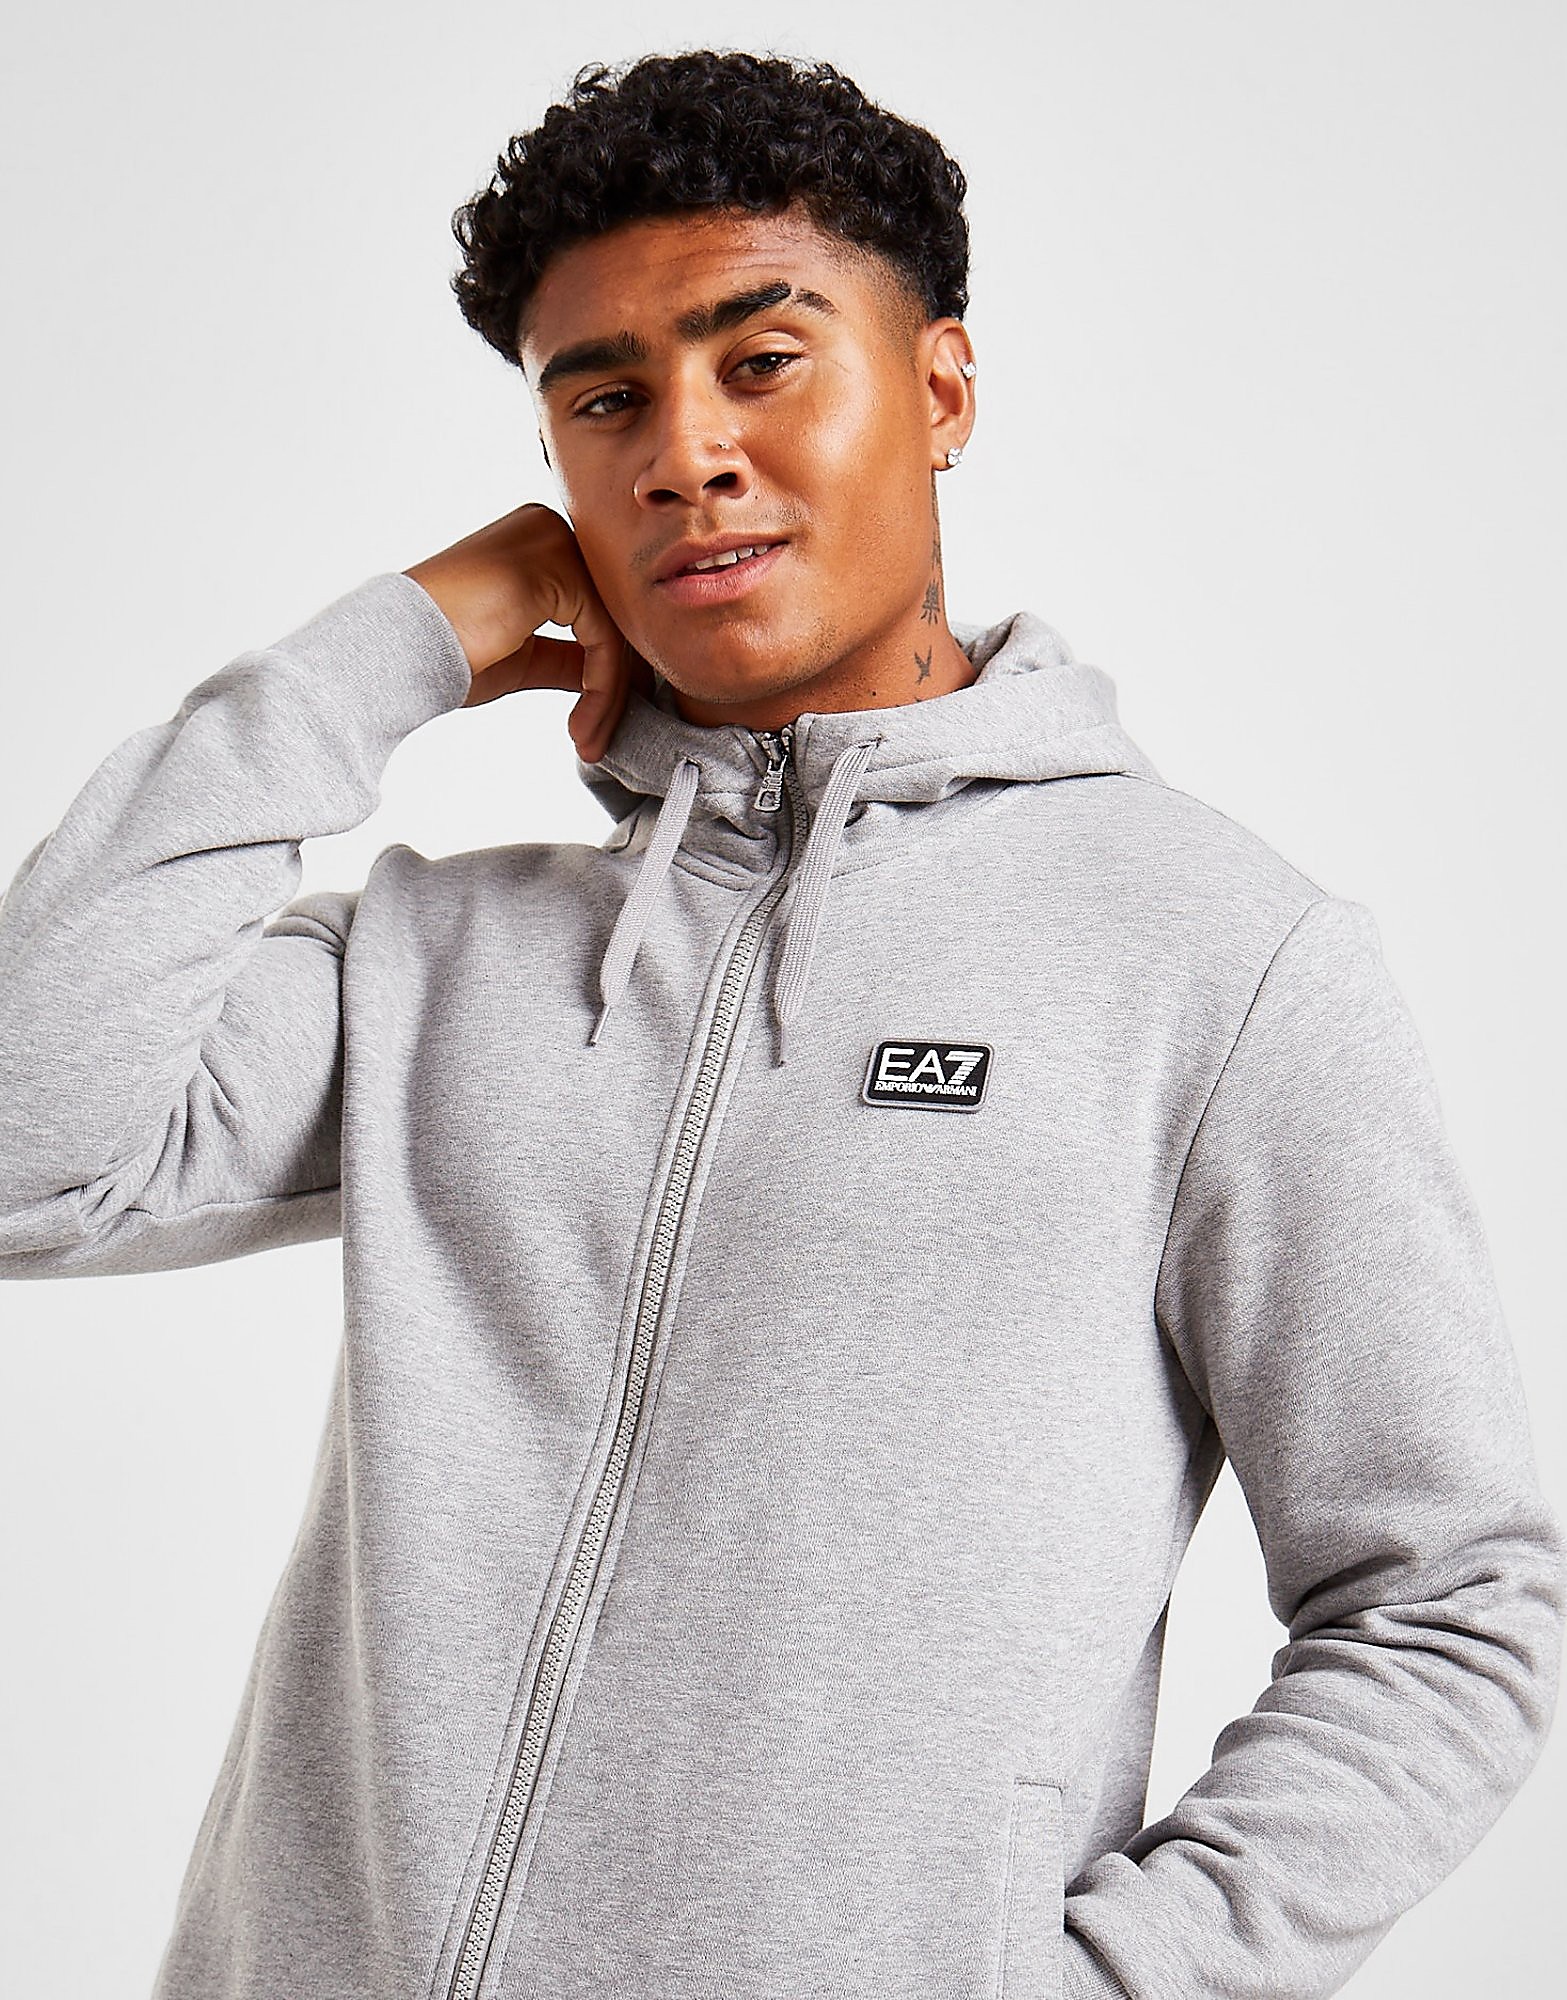 Emporio Armani EA7 Badge Full Zip Hooded Tracksuit - Only at JD - Cinzento - Mens, Cinzento